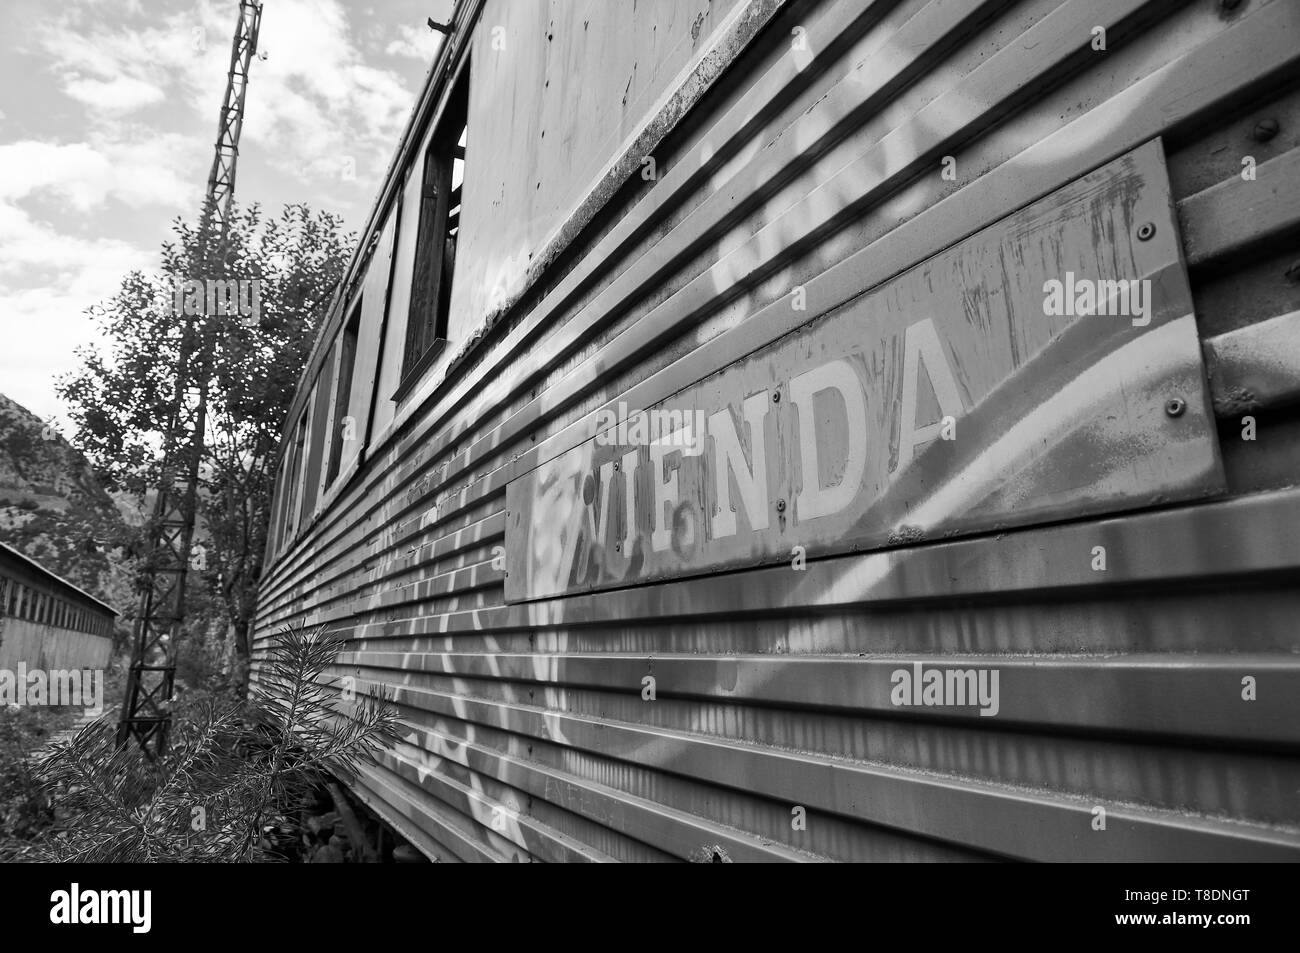 Detail of sleeping car train covered by graffiti at the abandoned Canfranc International railway station (Canfranc,Pyrenees,Huesca,Aragon,Spain) B&W Stock Photo